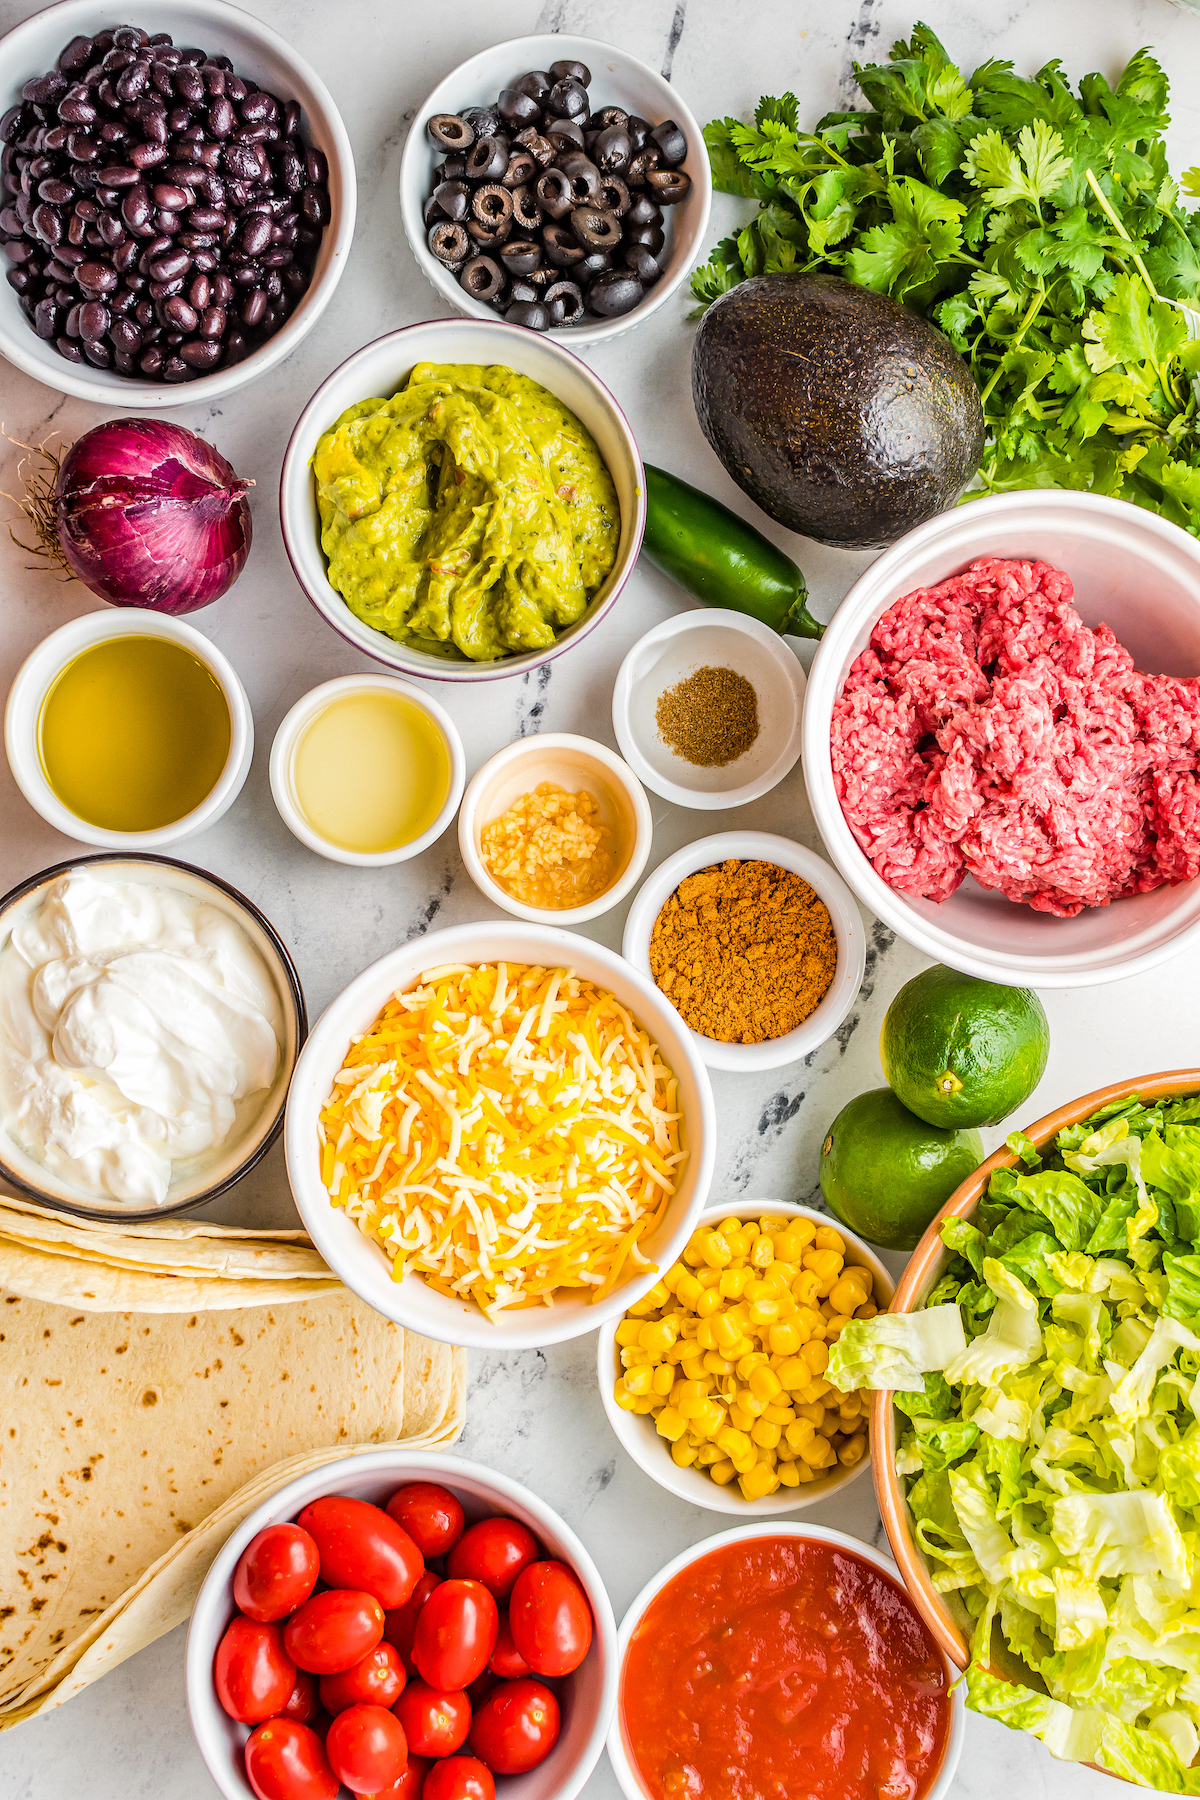 From top left: Black beans, sliced olives, cilantro, avocado, red onion, jalapeno, lime, olive oil, lime juice, garlic, salt and pepper, ground beef, taco seasoning, sour cream, shredded cheese, corn, shredded lettuce, tortillas, grape tomatoes, and salsa.